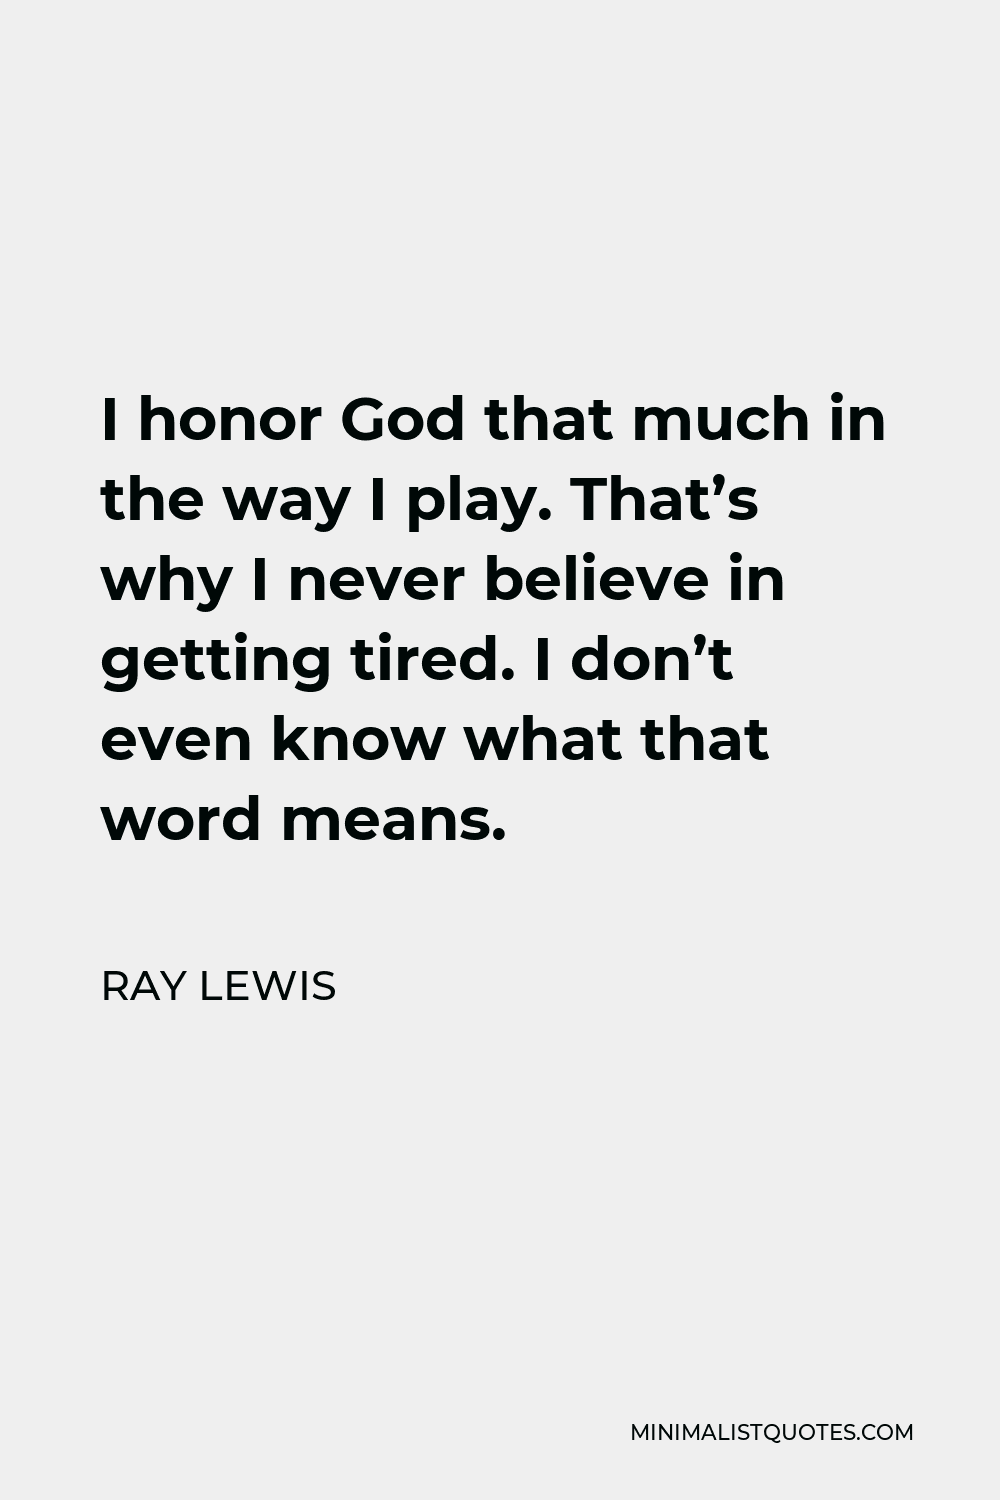 Ray Lewis Quote - I honor God that much in the way I play. That’s why I never believe in getting tired. I don’t even know what that word means.